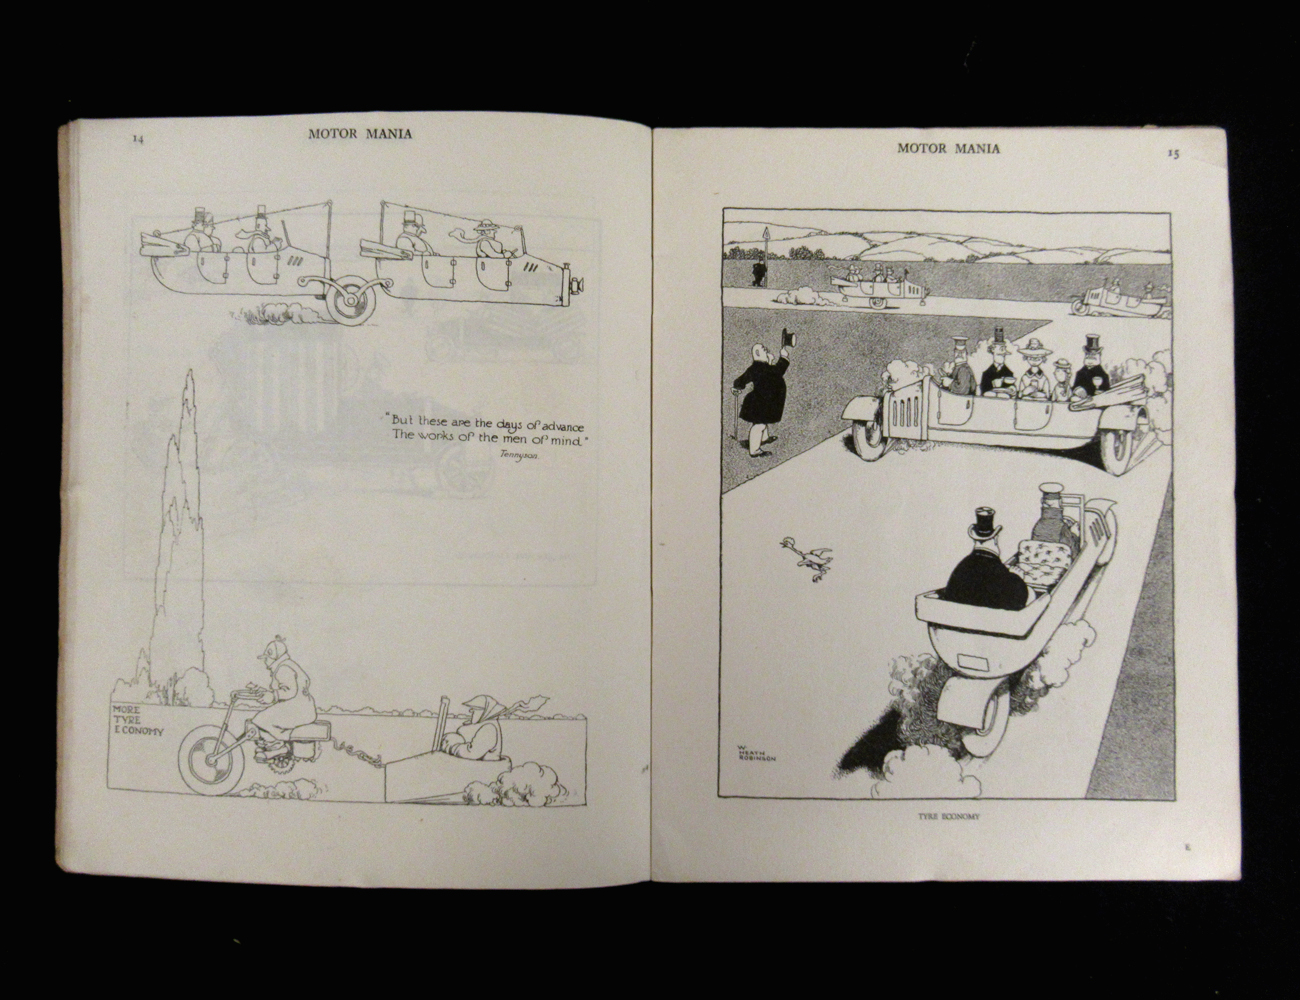 WILLIAM HEATH ROBINSON: MOTORMANIA, London, The Motor Owner, [1921], 1st edition, adverts at front - Image 3 of 4